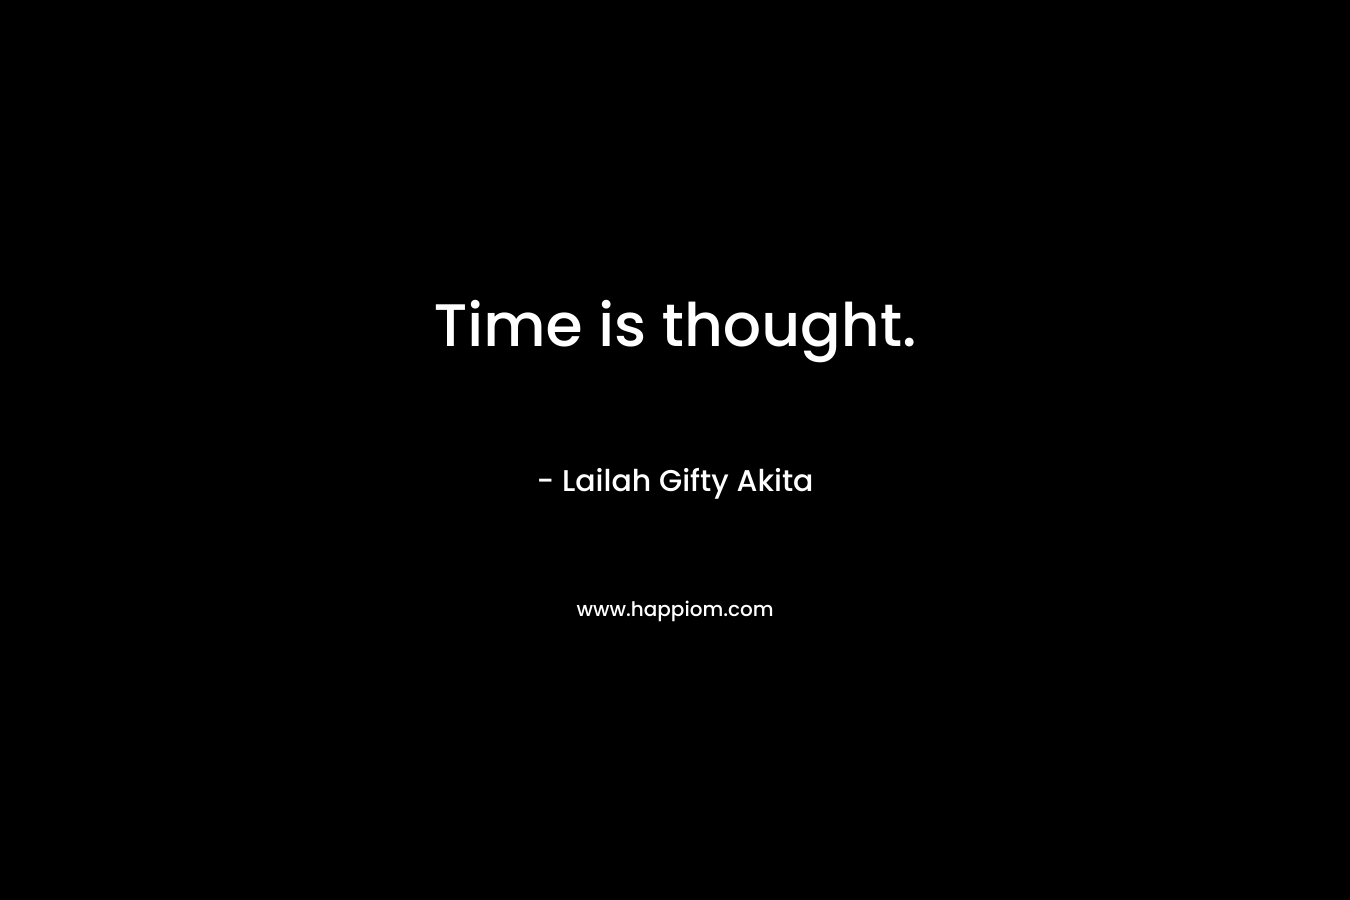 Time is thought.